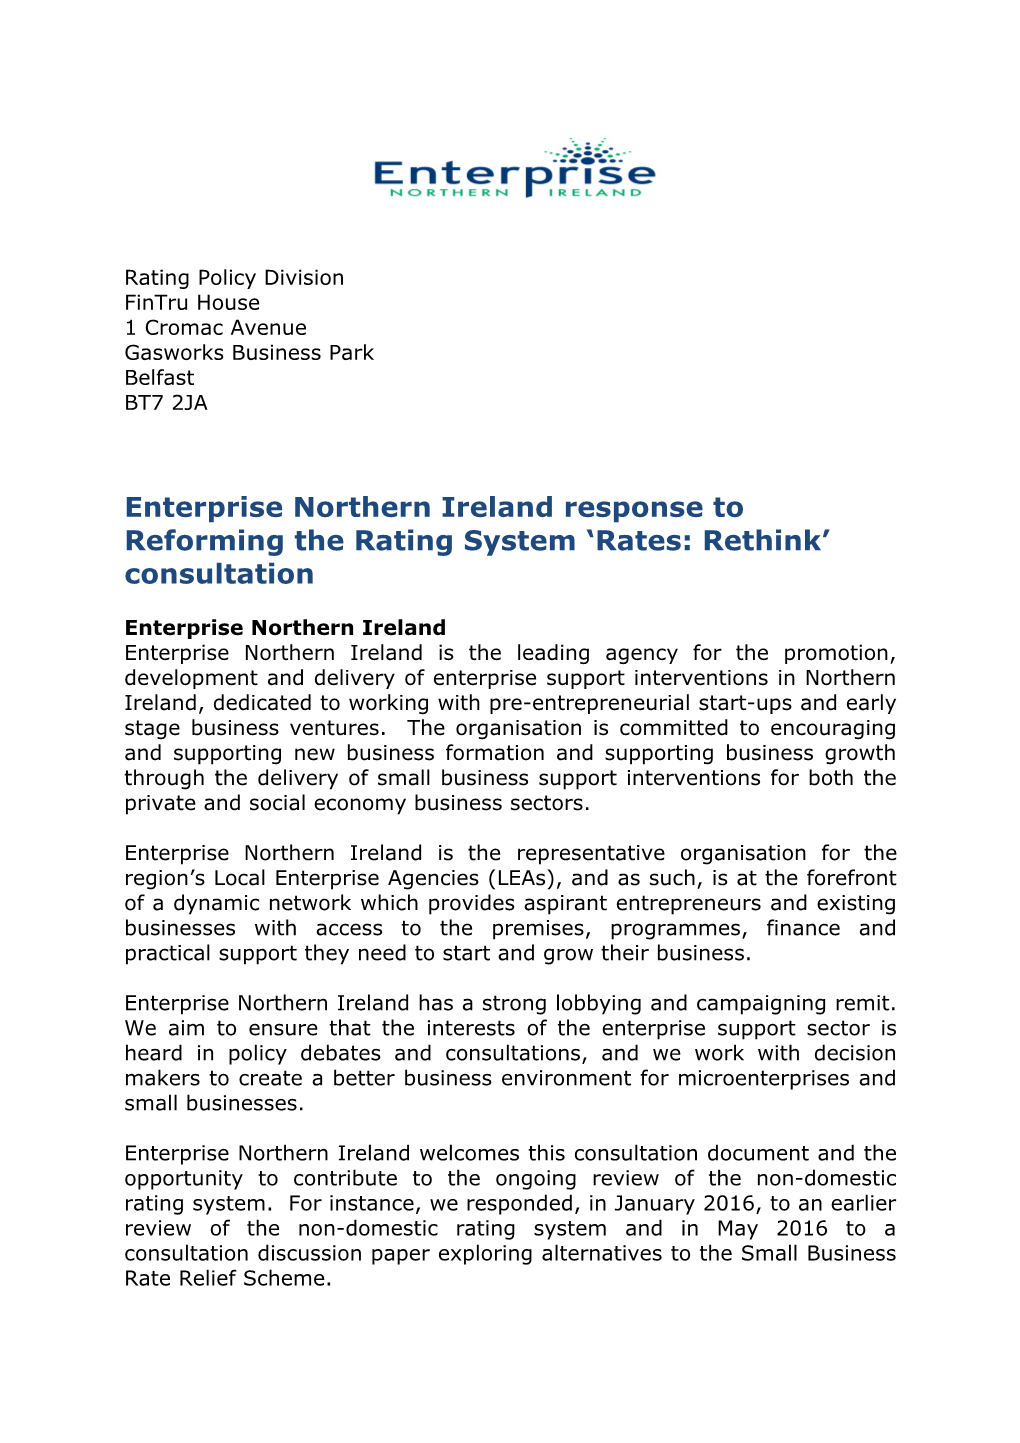 Enterprise Northern Ireland Response to Reforming the Rating System Rates: Rethink Consultation